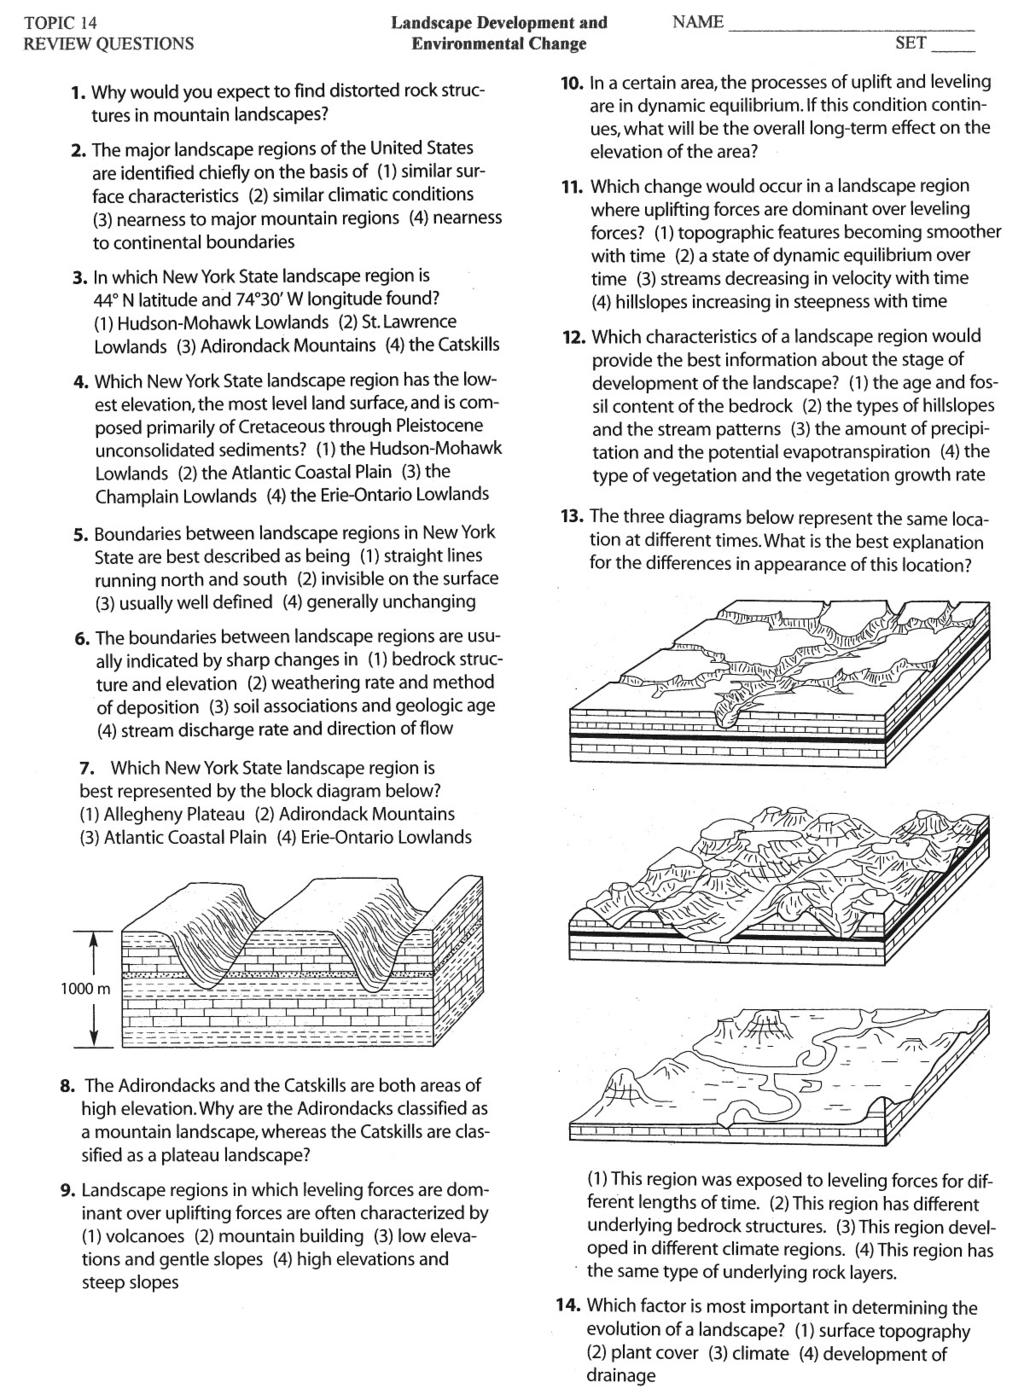 TOPIC 14 REVIEW QUESTIONS Landscape Development and Environmental Change NAME SET 1. Whywould you expect to find distorted rockstructures in mountain landscapes? 2.